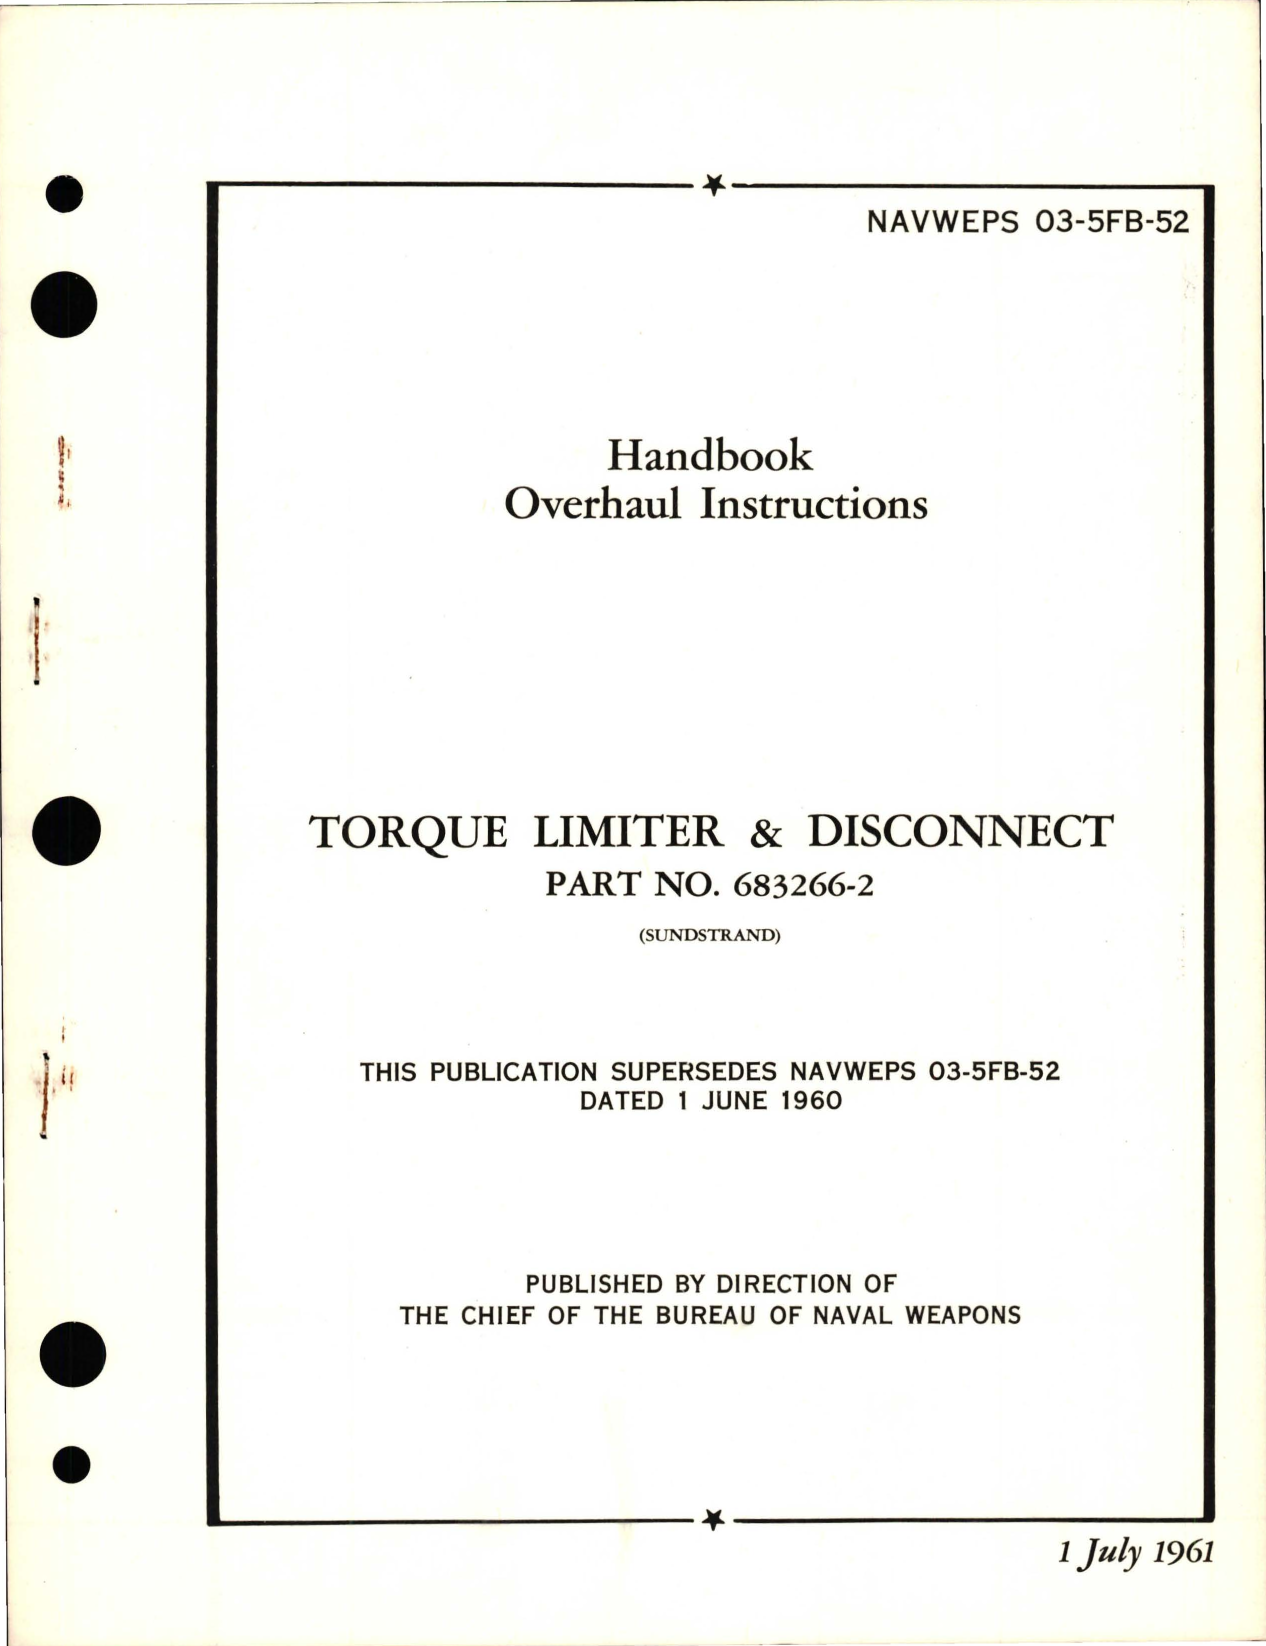 Sample page 1 from AirCorps Library document: Overhaul Instructions for Torque Limiter & Disconnect - Part 683266-2